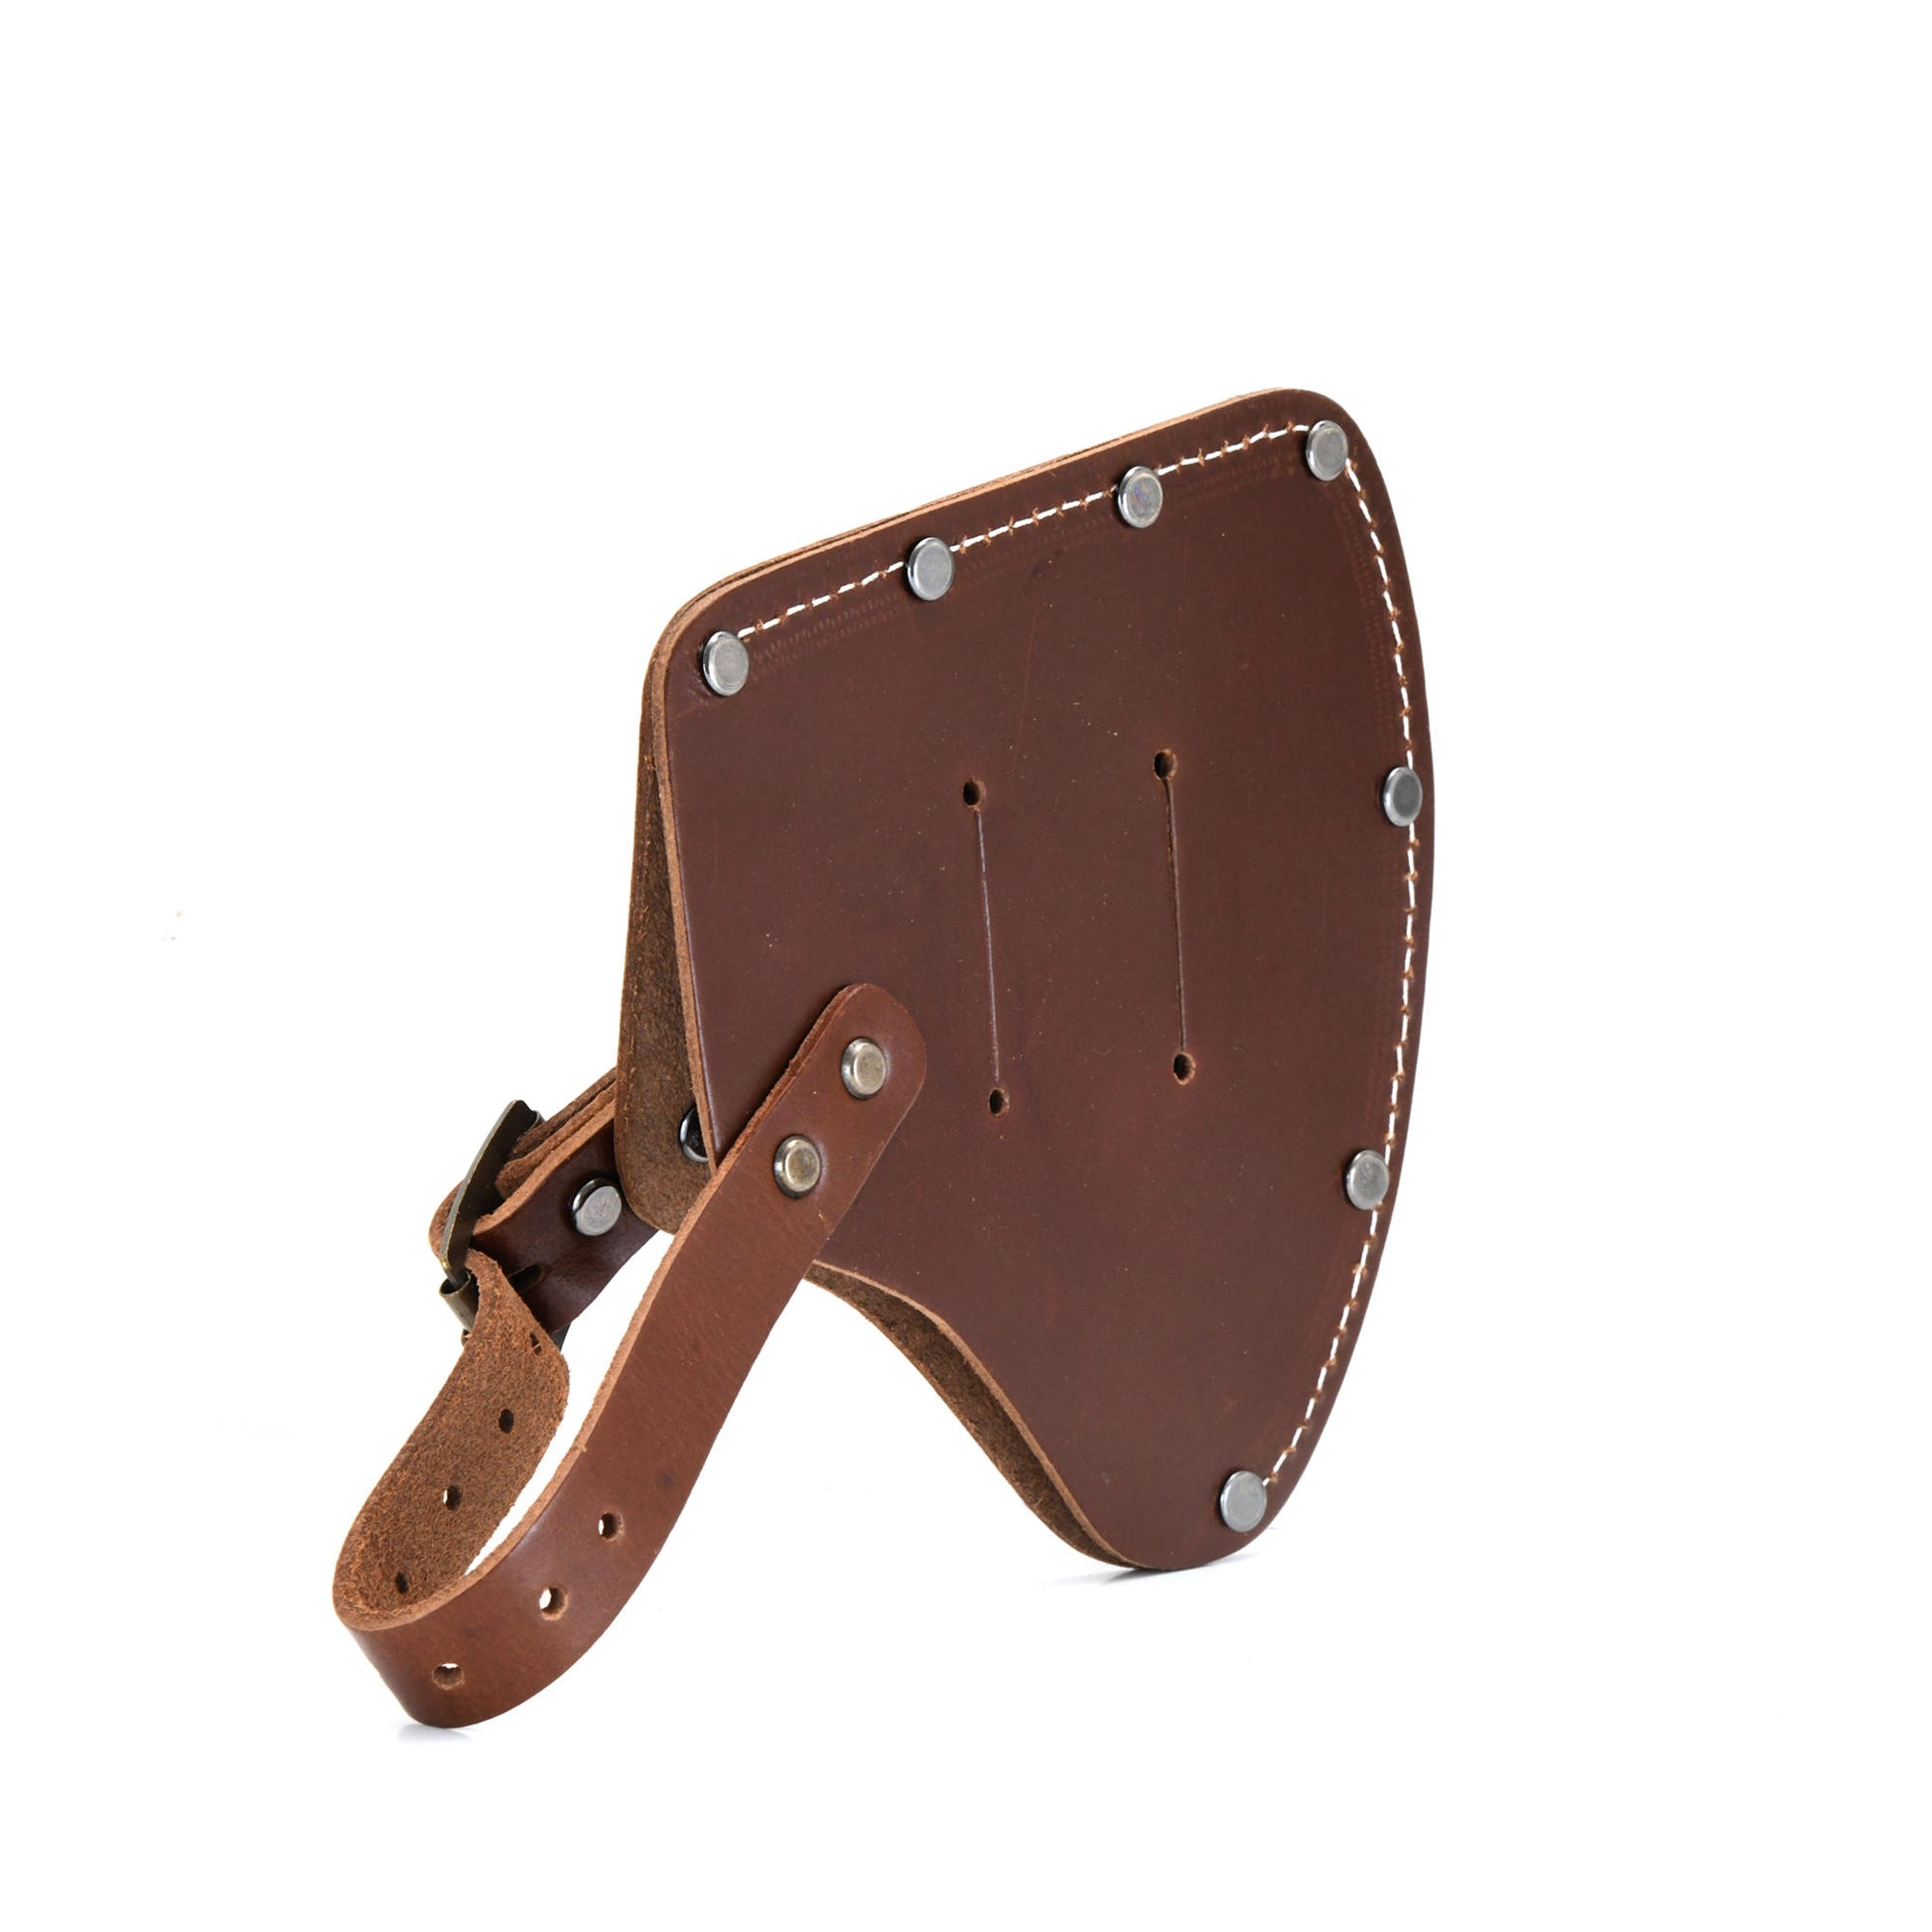 Style n Craft 98027 - Camper's Axe Sheath / Cover in Heavy Full Grain Leather in Dark Tan Color with a Strap and Buckle Closure - Back View